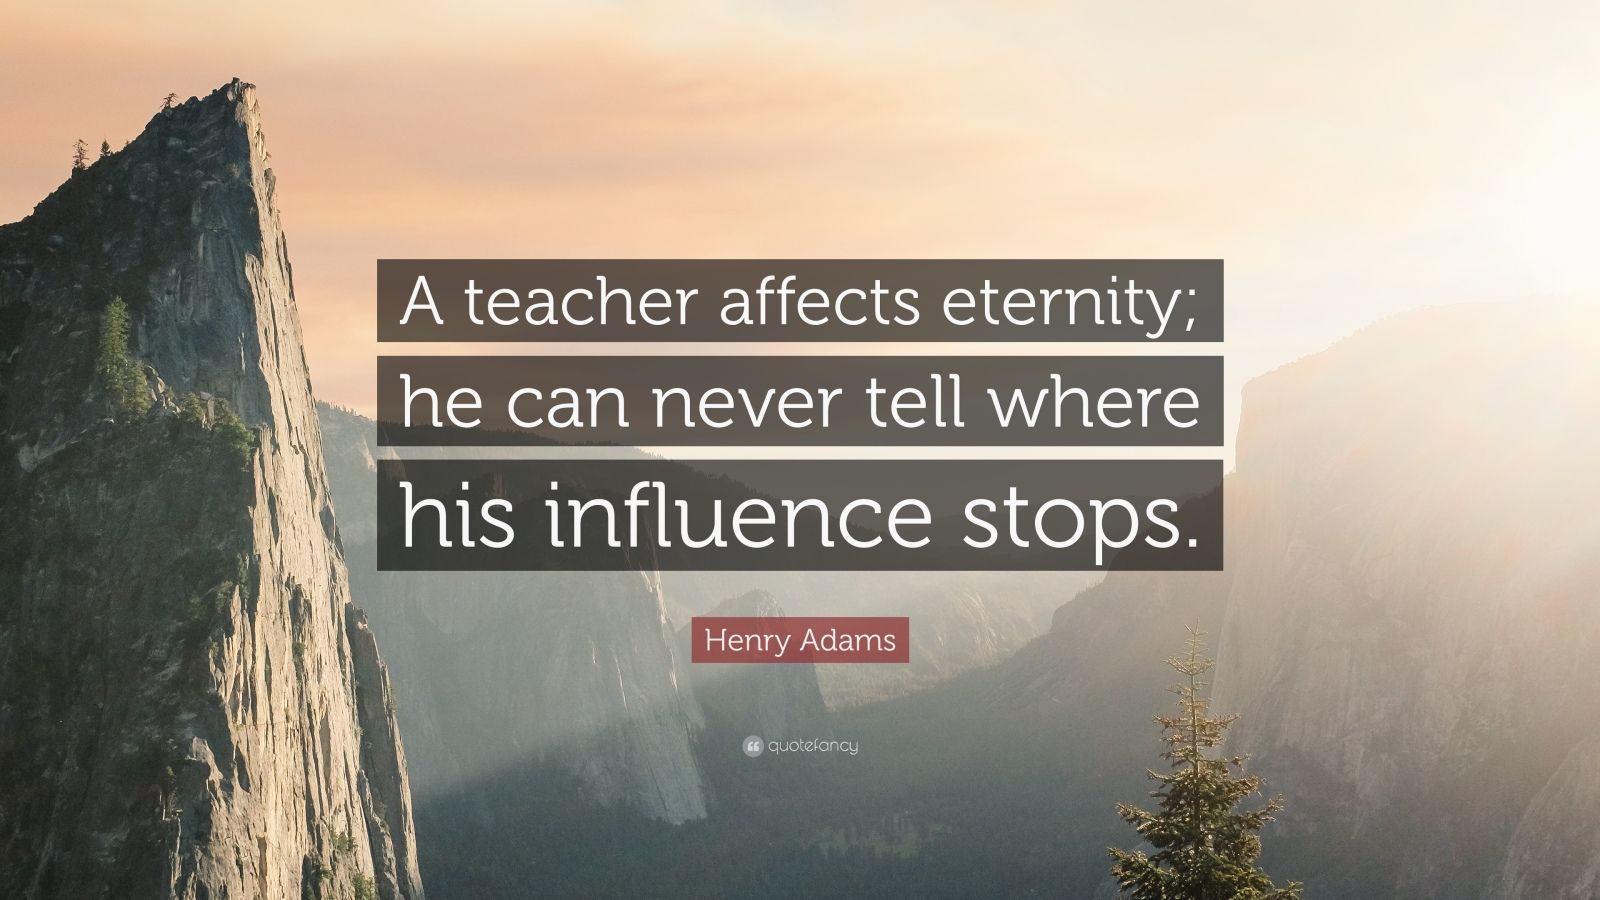 henry-adams-quote-a-teacher-affects-eternity-he-can-never-tell-where